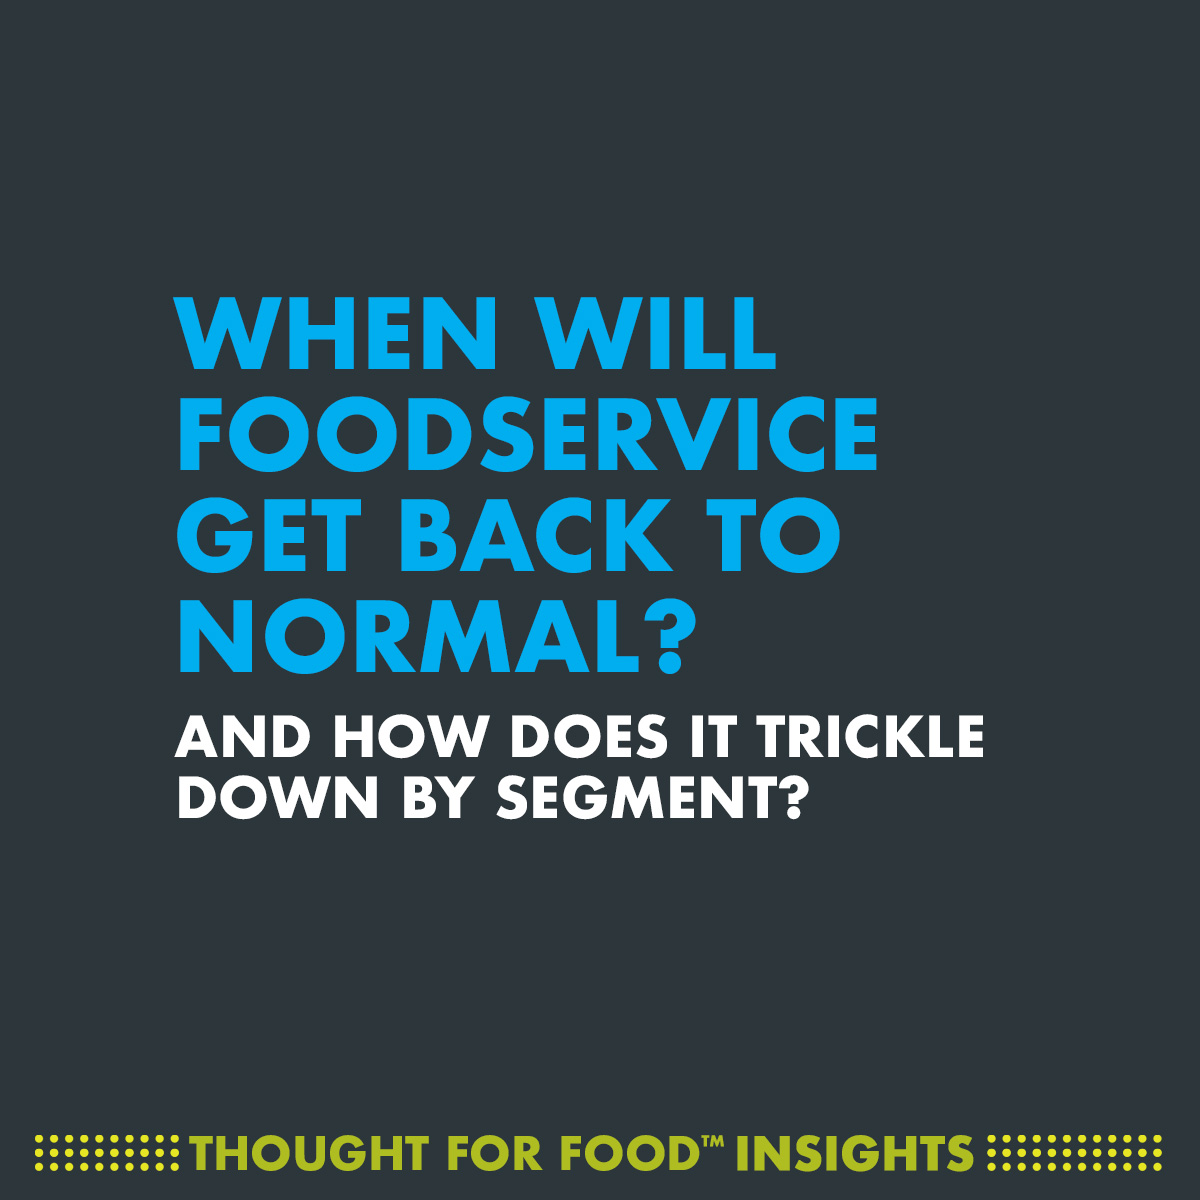 when will foodservice get back to normal?